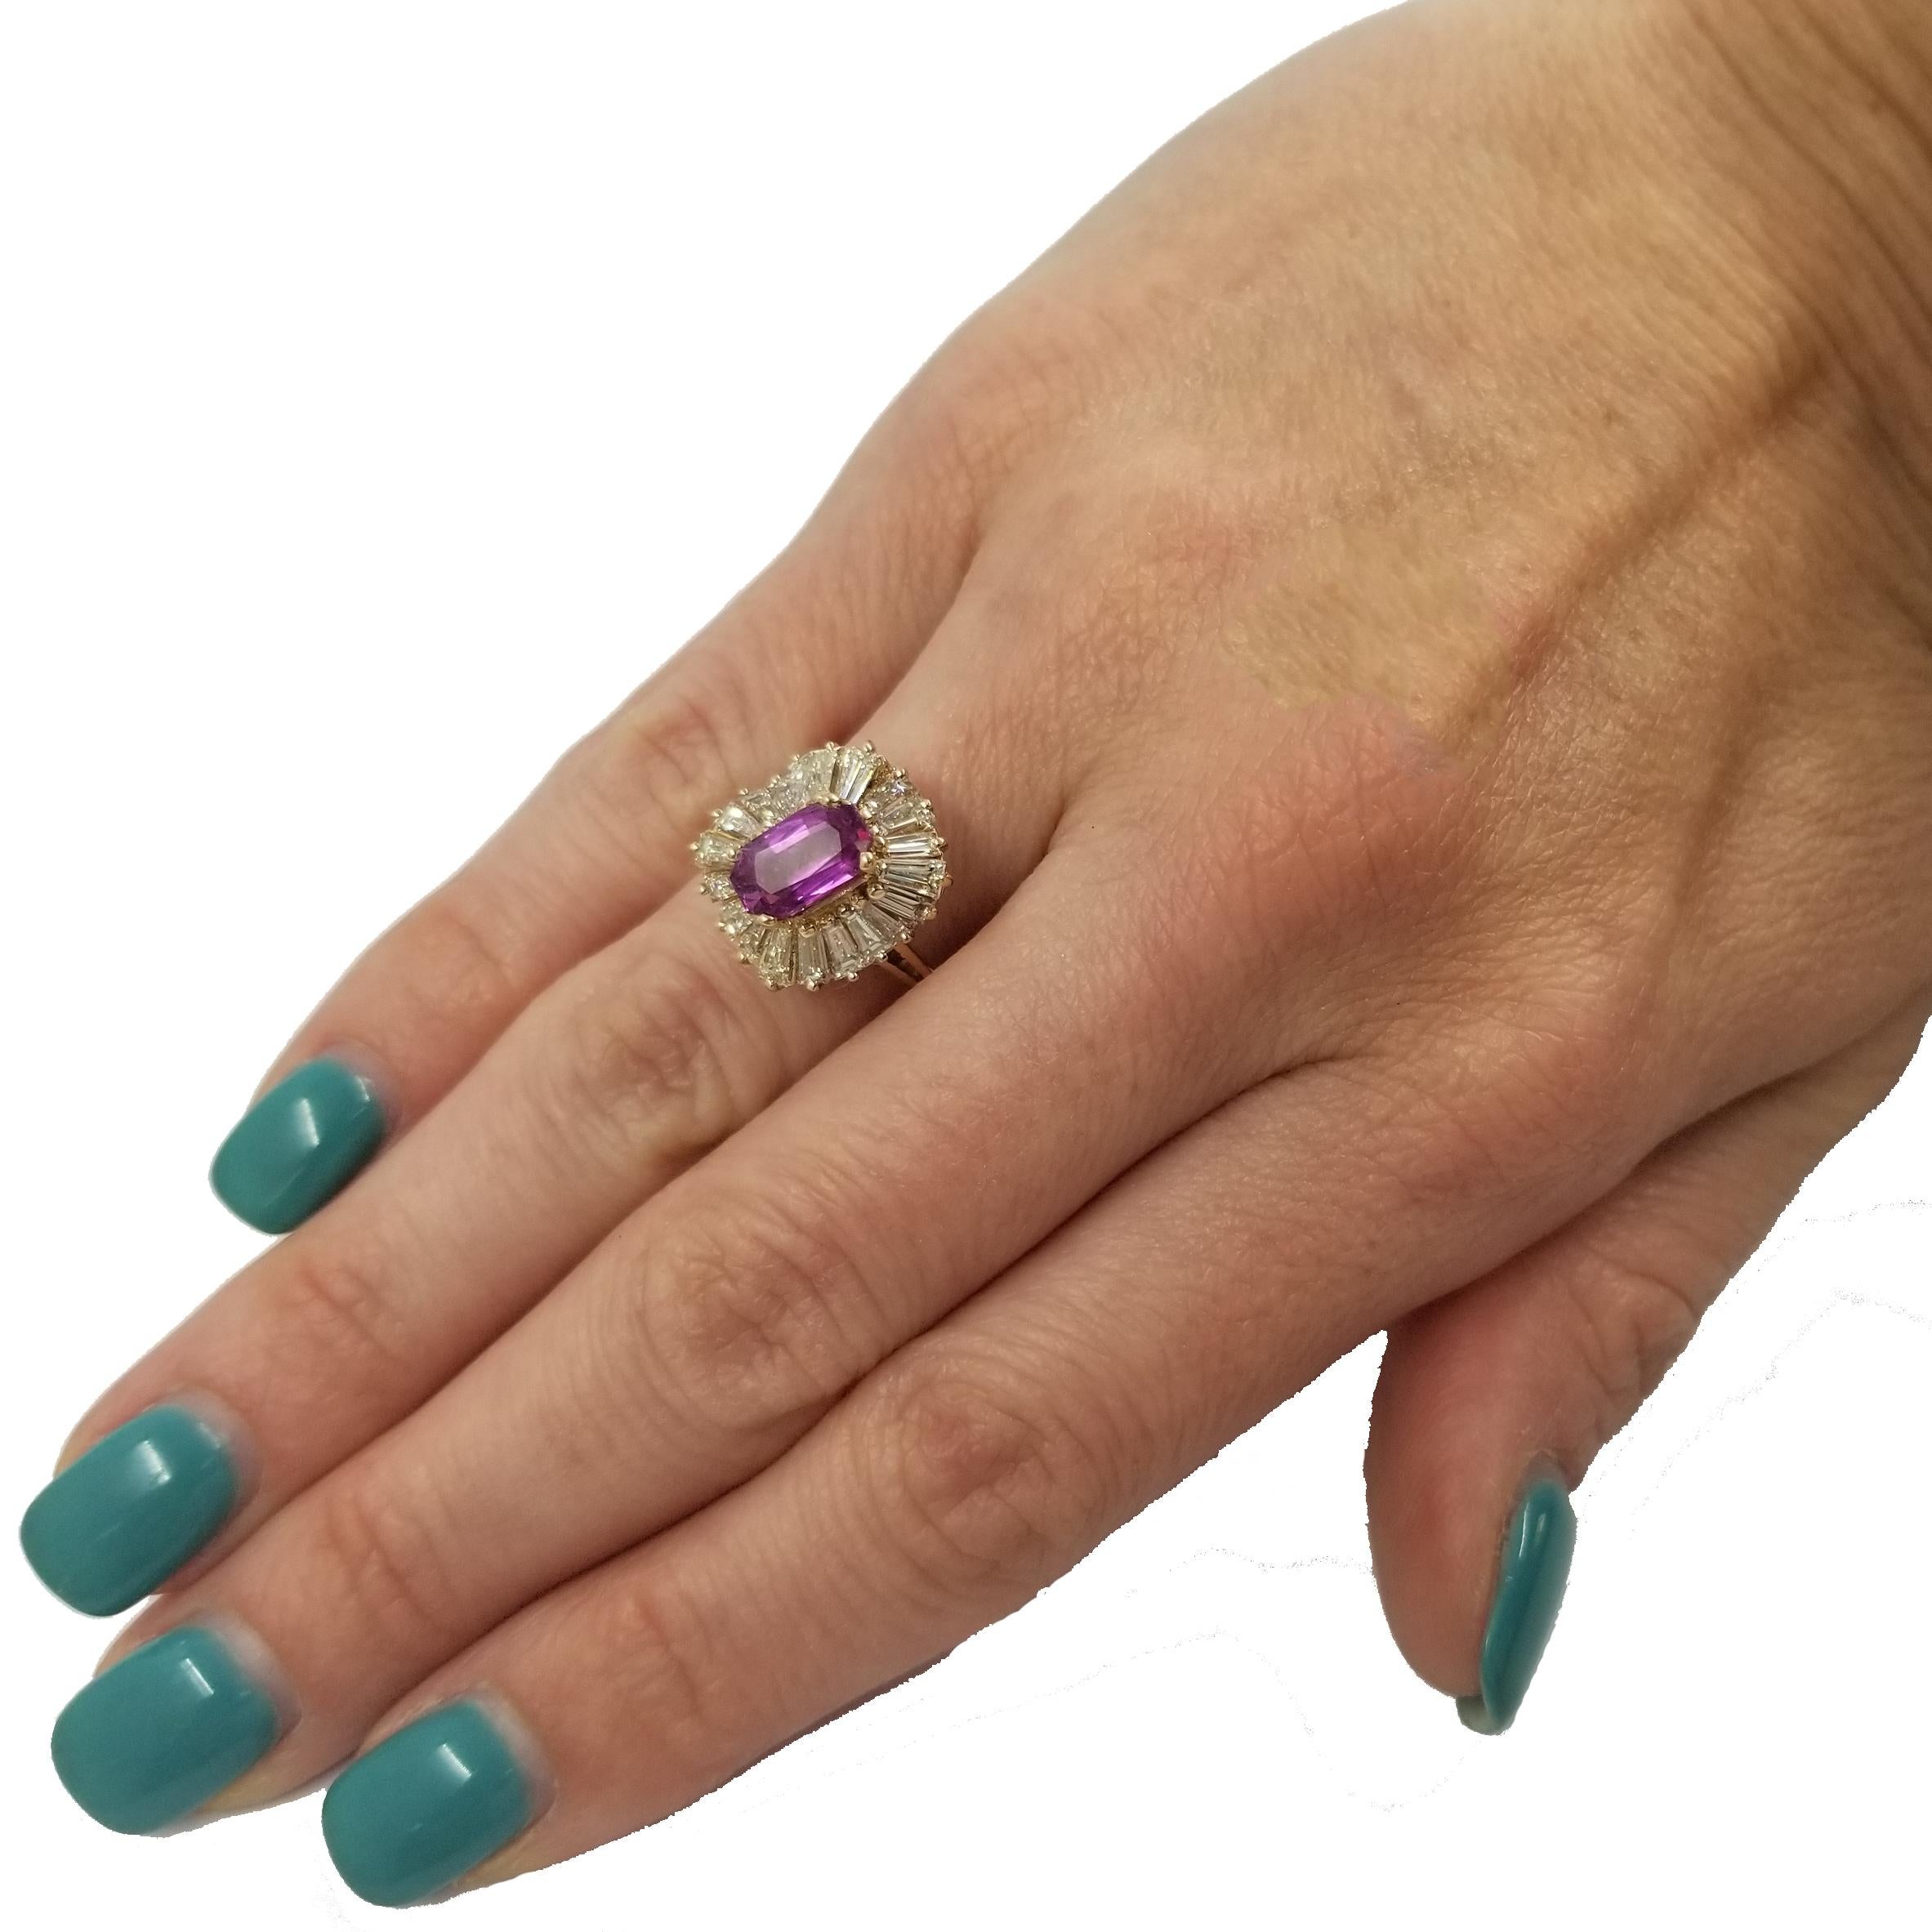 14 Karat Yellow Gold Ring With Approximately 1 Carat Elongated Oval Pink Sapphire. 20 Tapered Baguette Cut Diamonds of VS Clarity & H Color Totaling Approximately 1 Carat. Current Finger Size 7; Purchase Includes Free Sizing.